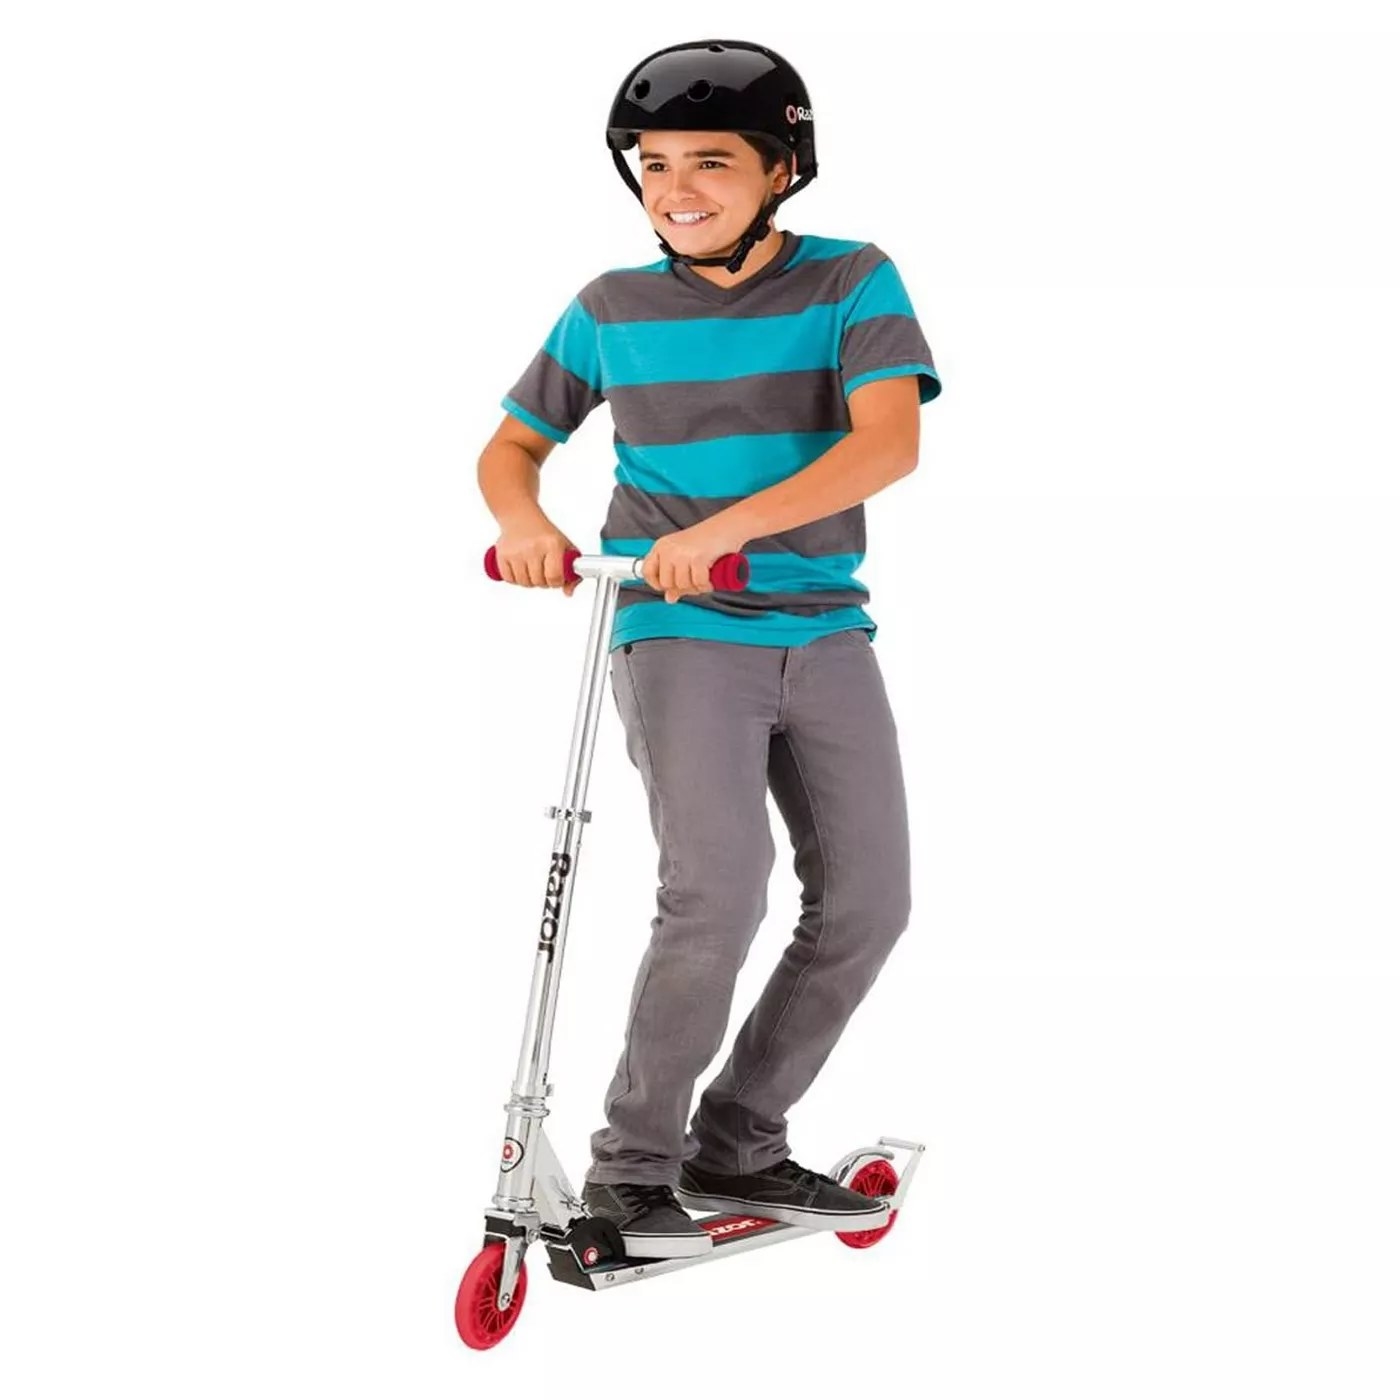 A child on the Razor scooter